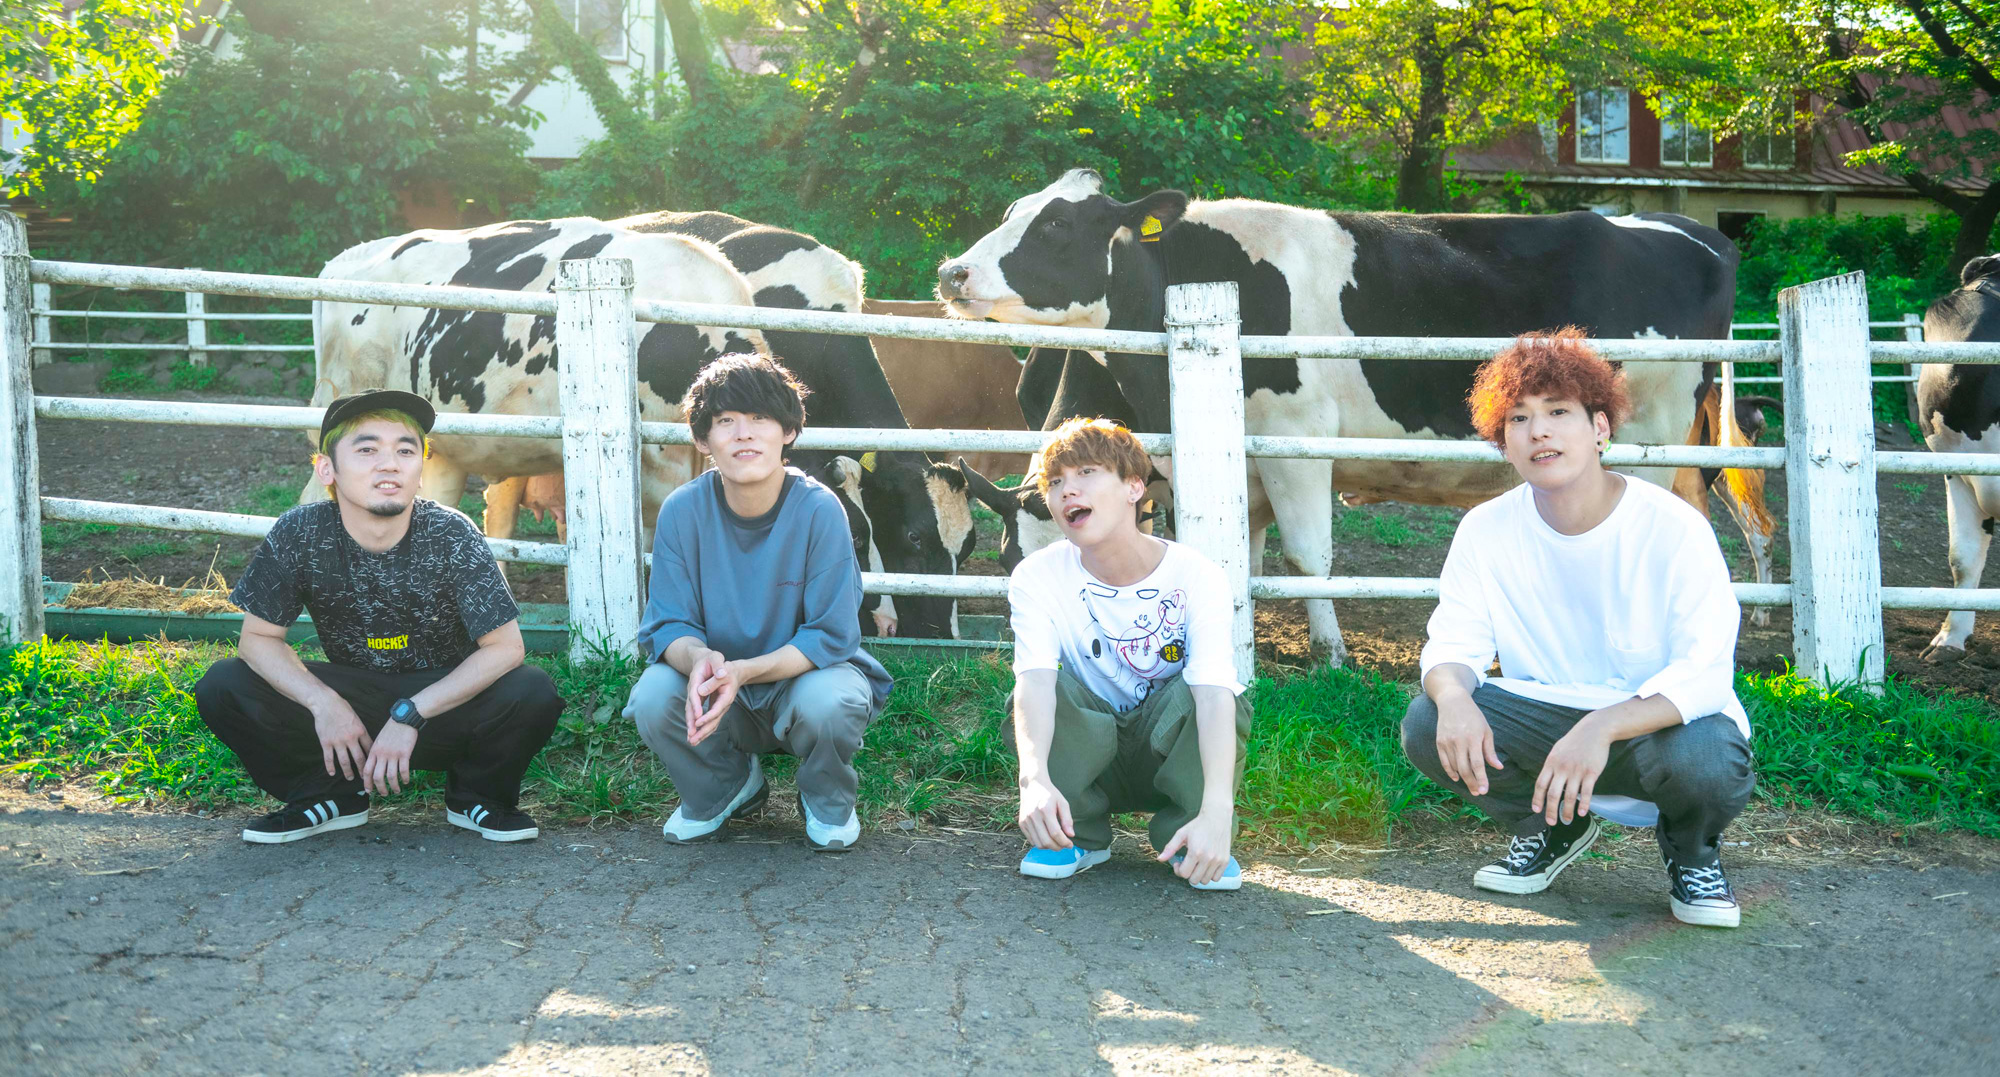 04 Limited Sazabys OFFICIAL WEB SITE